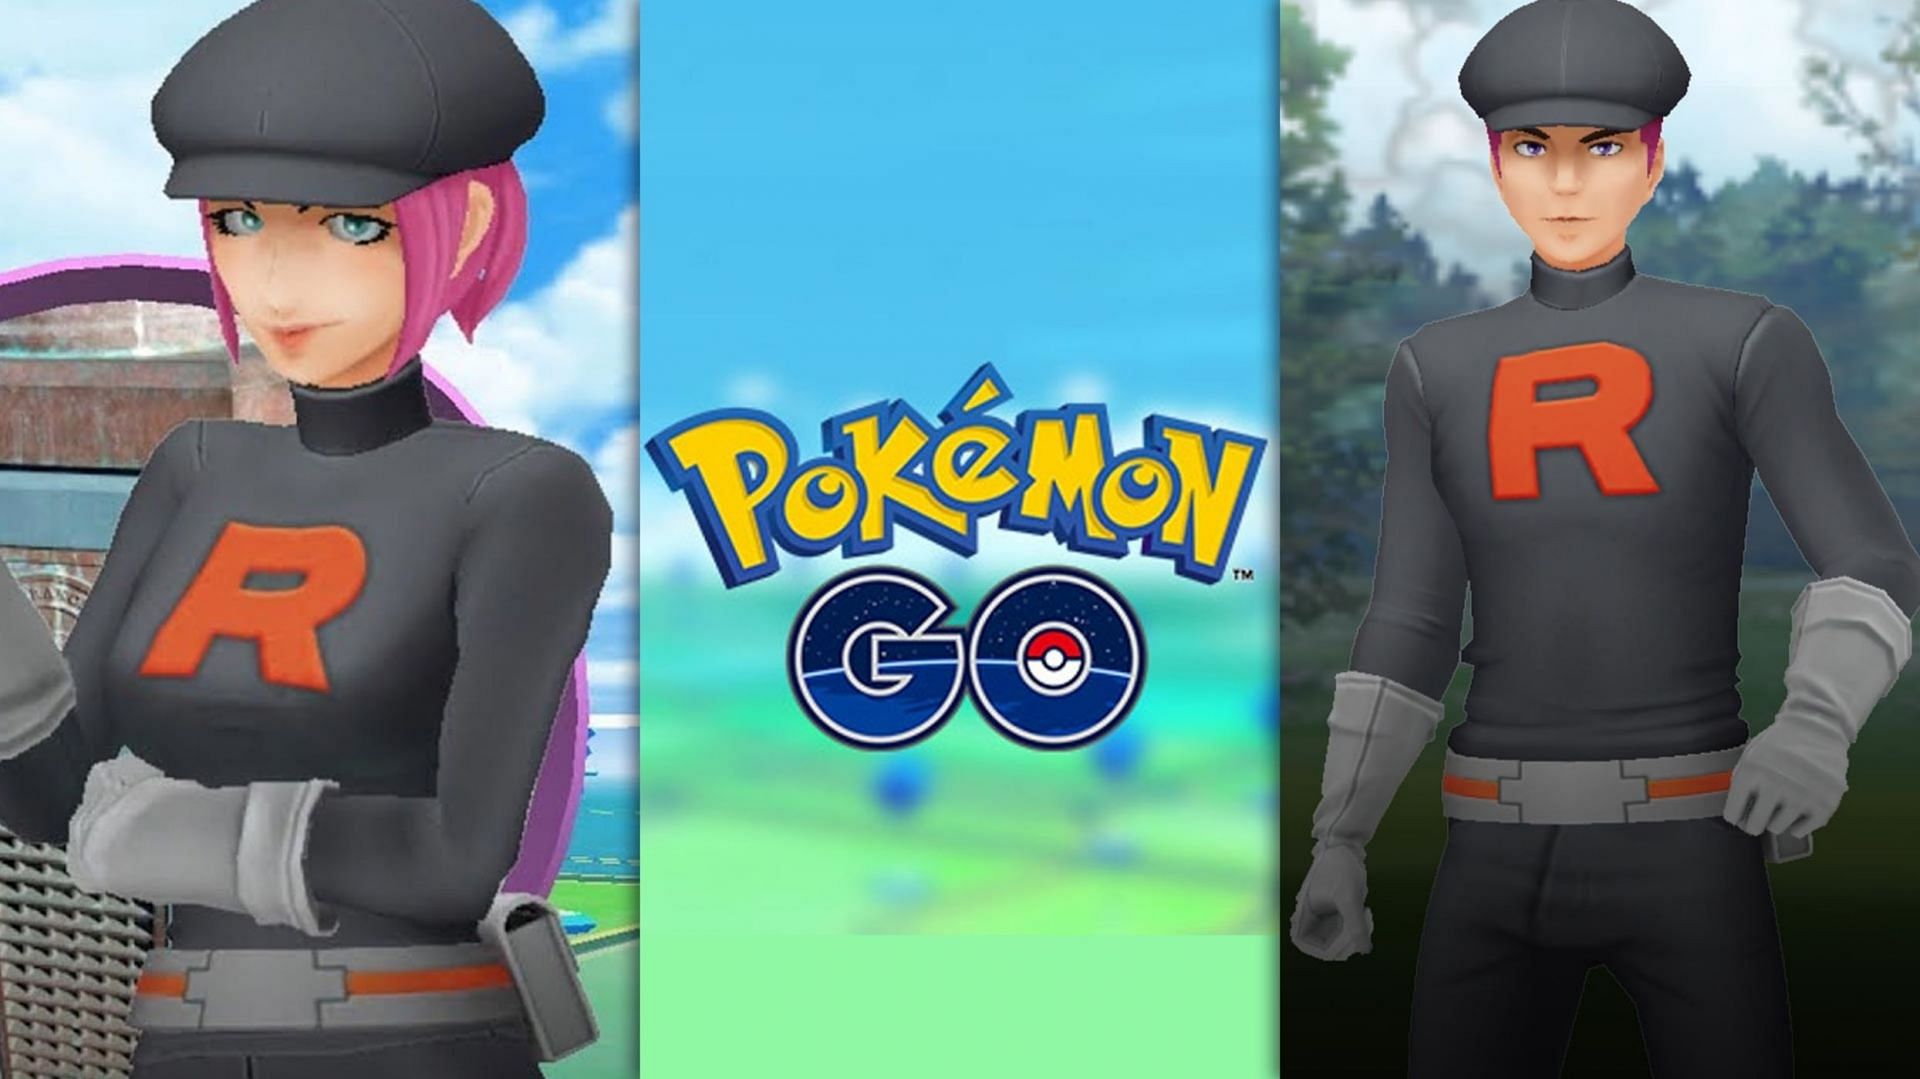 Team GO Rocket is falling back, but Pokemon GO trainers can still pursue them while performing special research tasks (Image via Niantic)